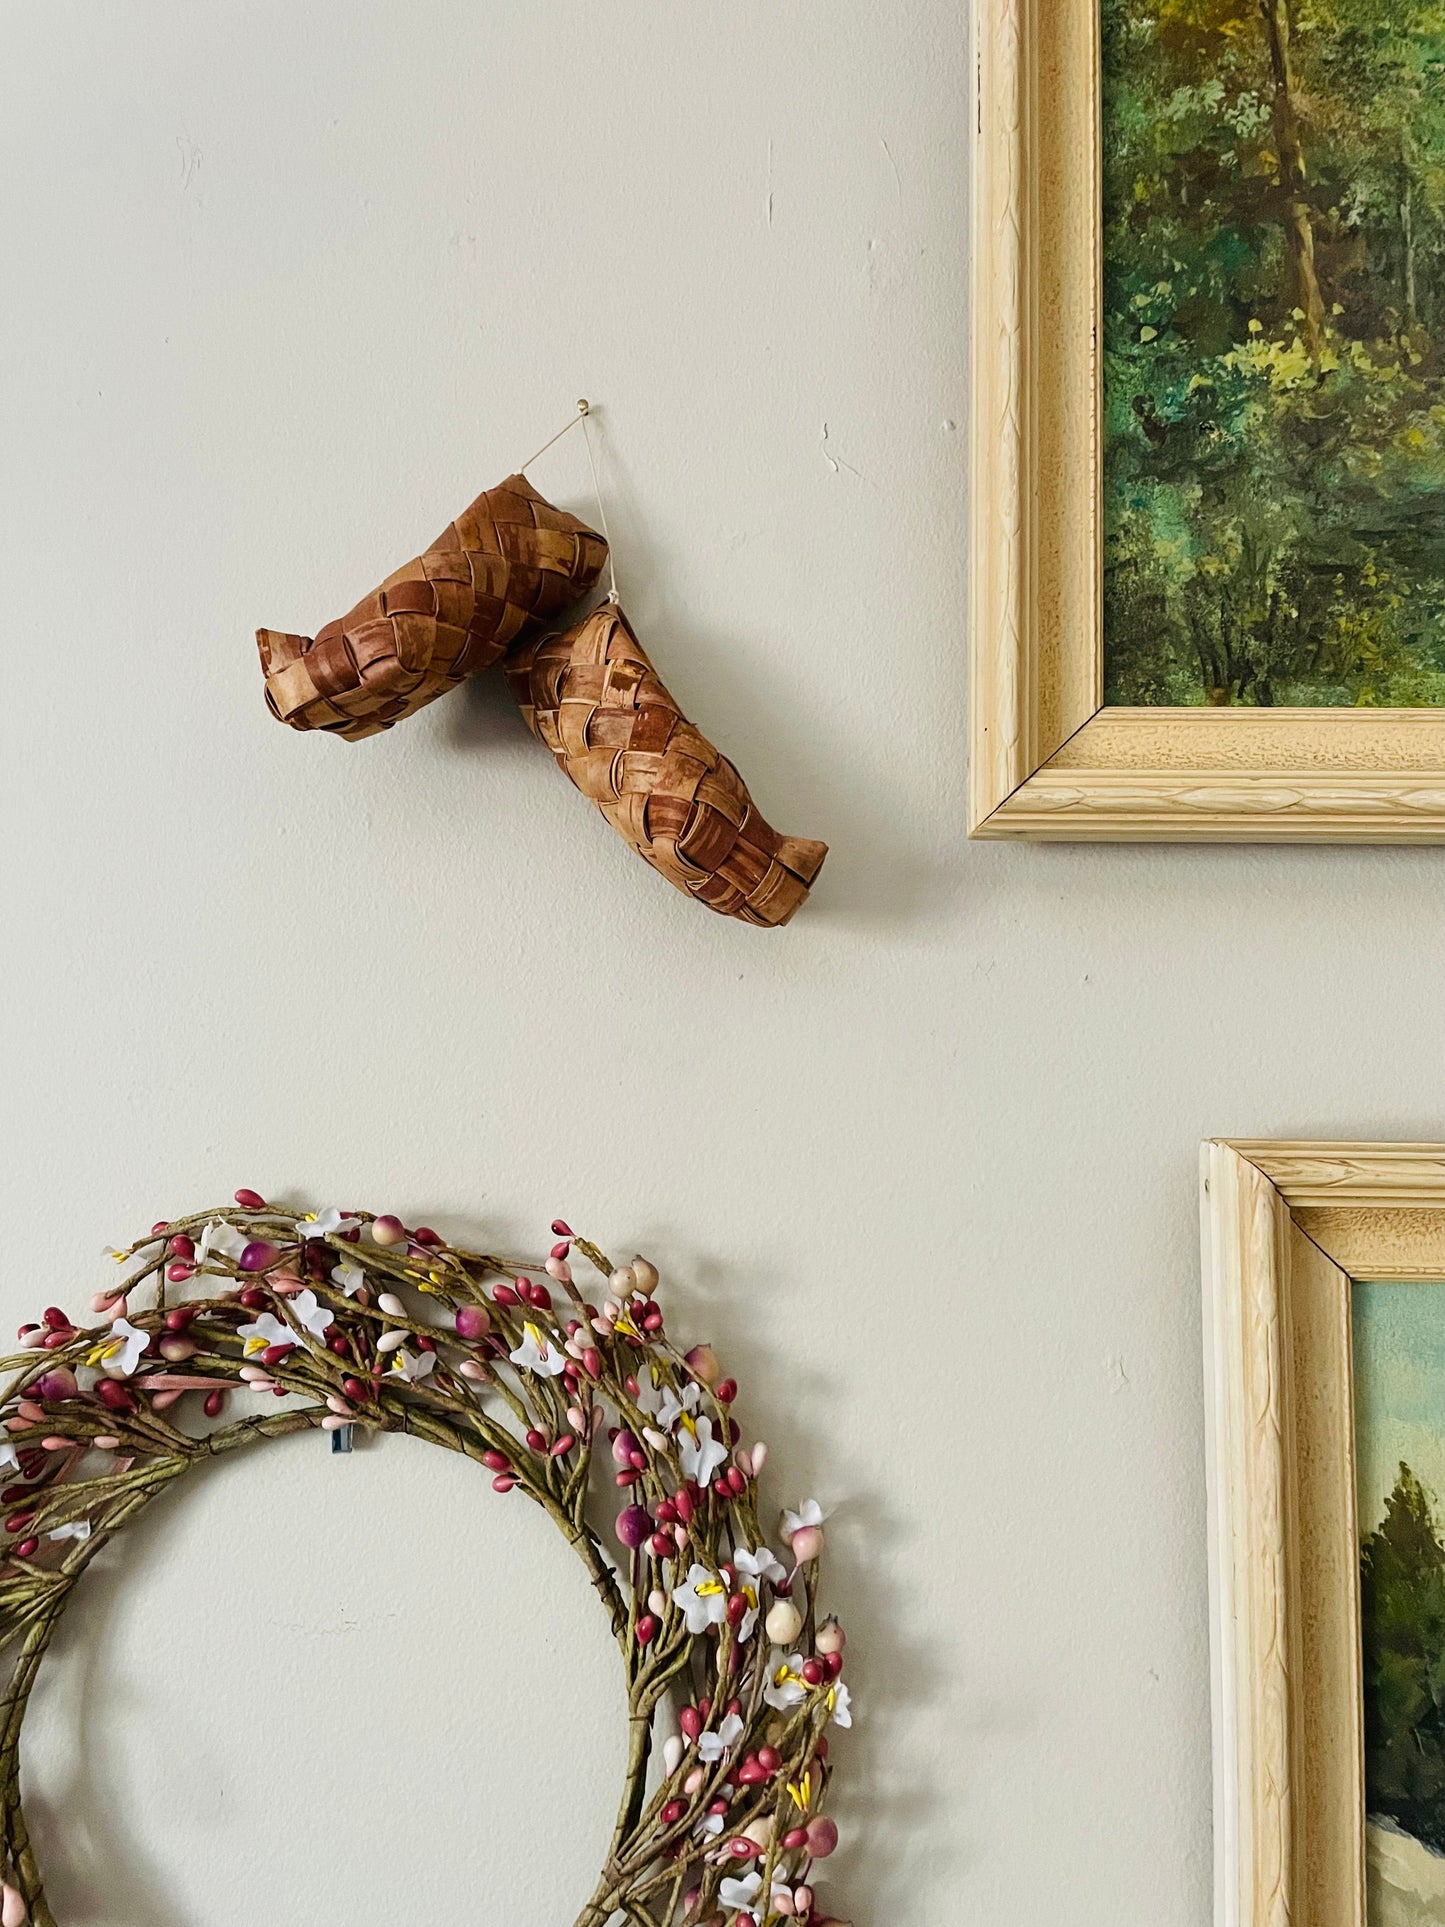 Finnish Birch Bark Woven Wood Shoes # 1 - Set of 2 Hanging on Rope